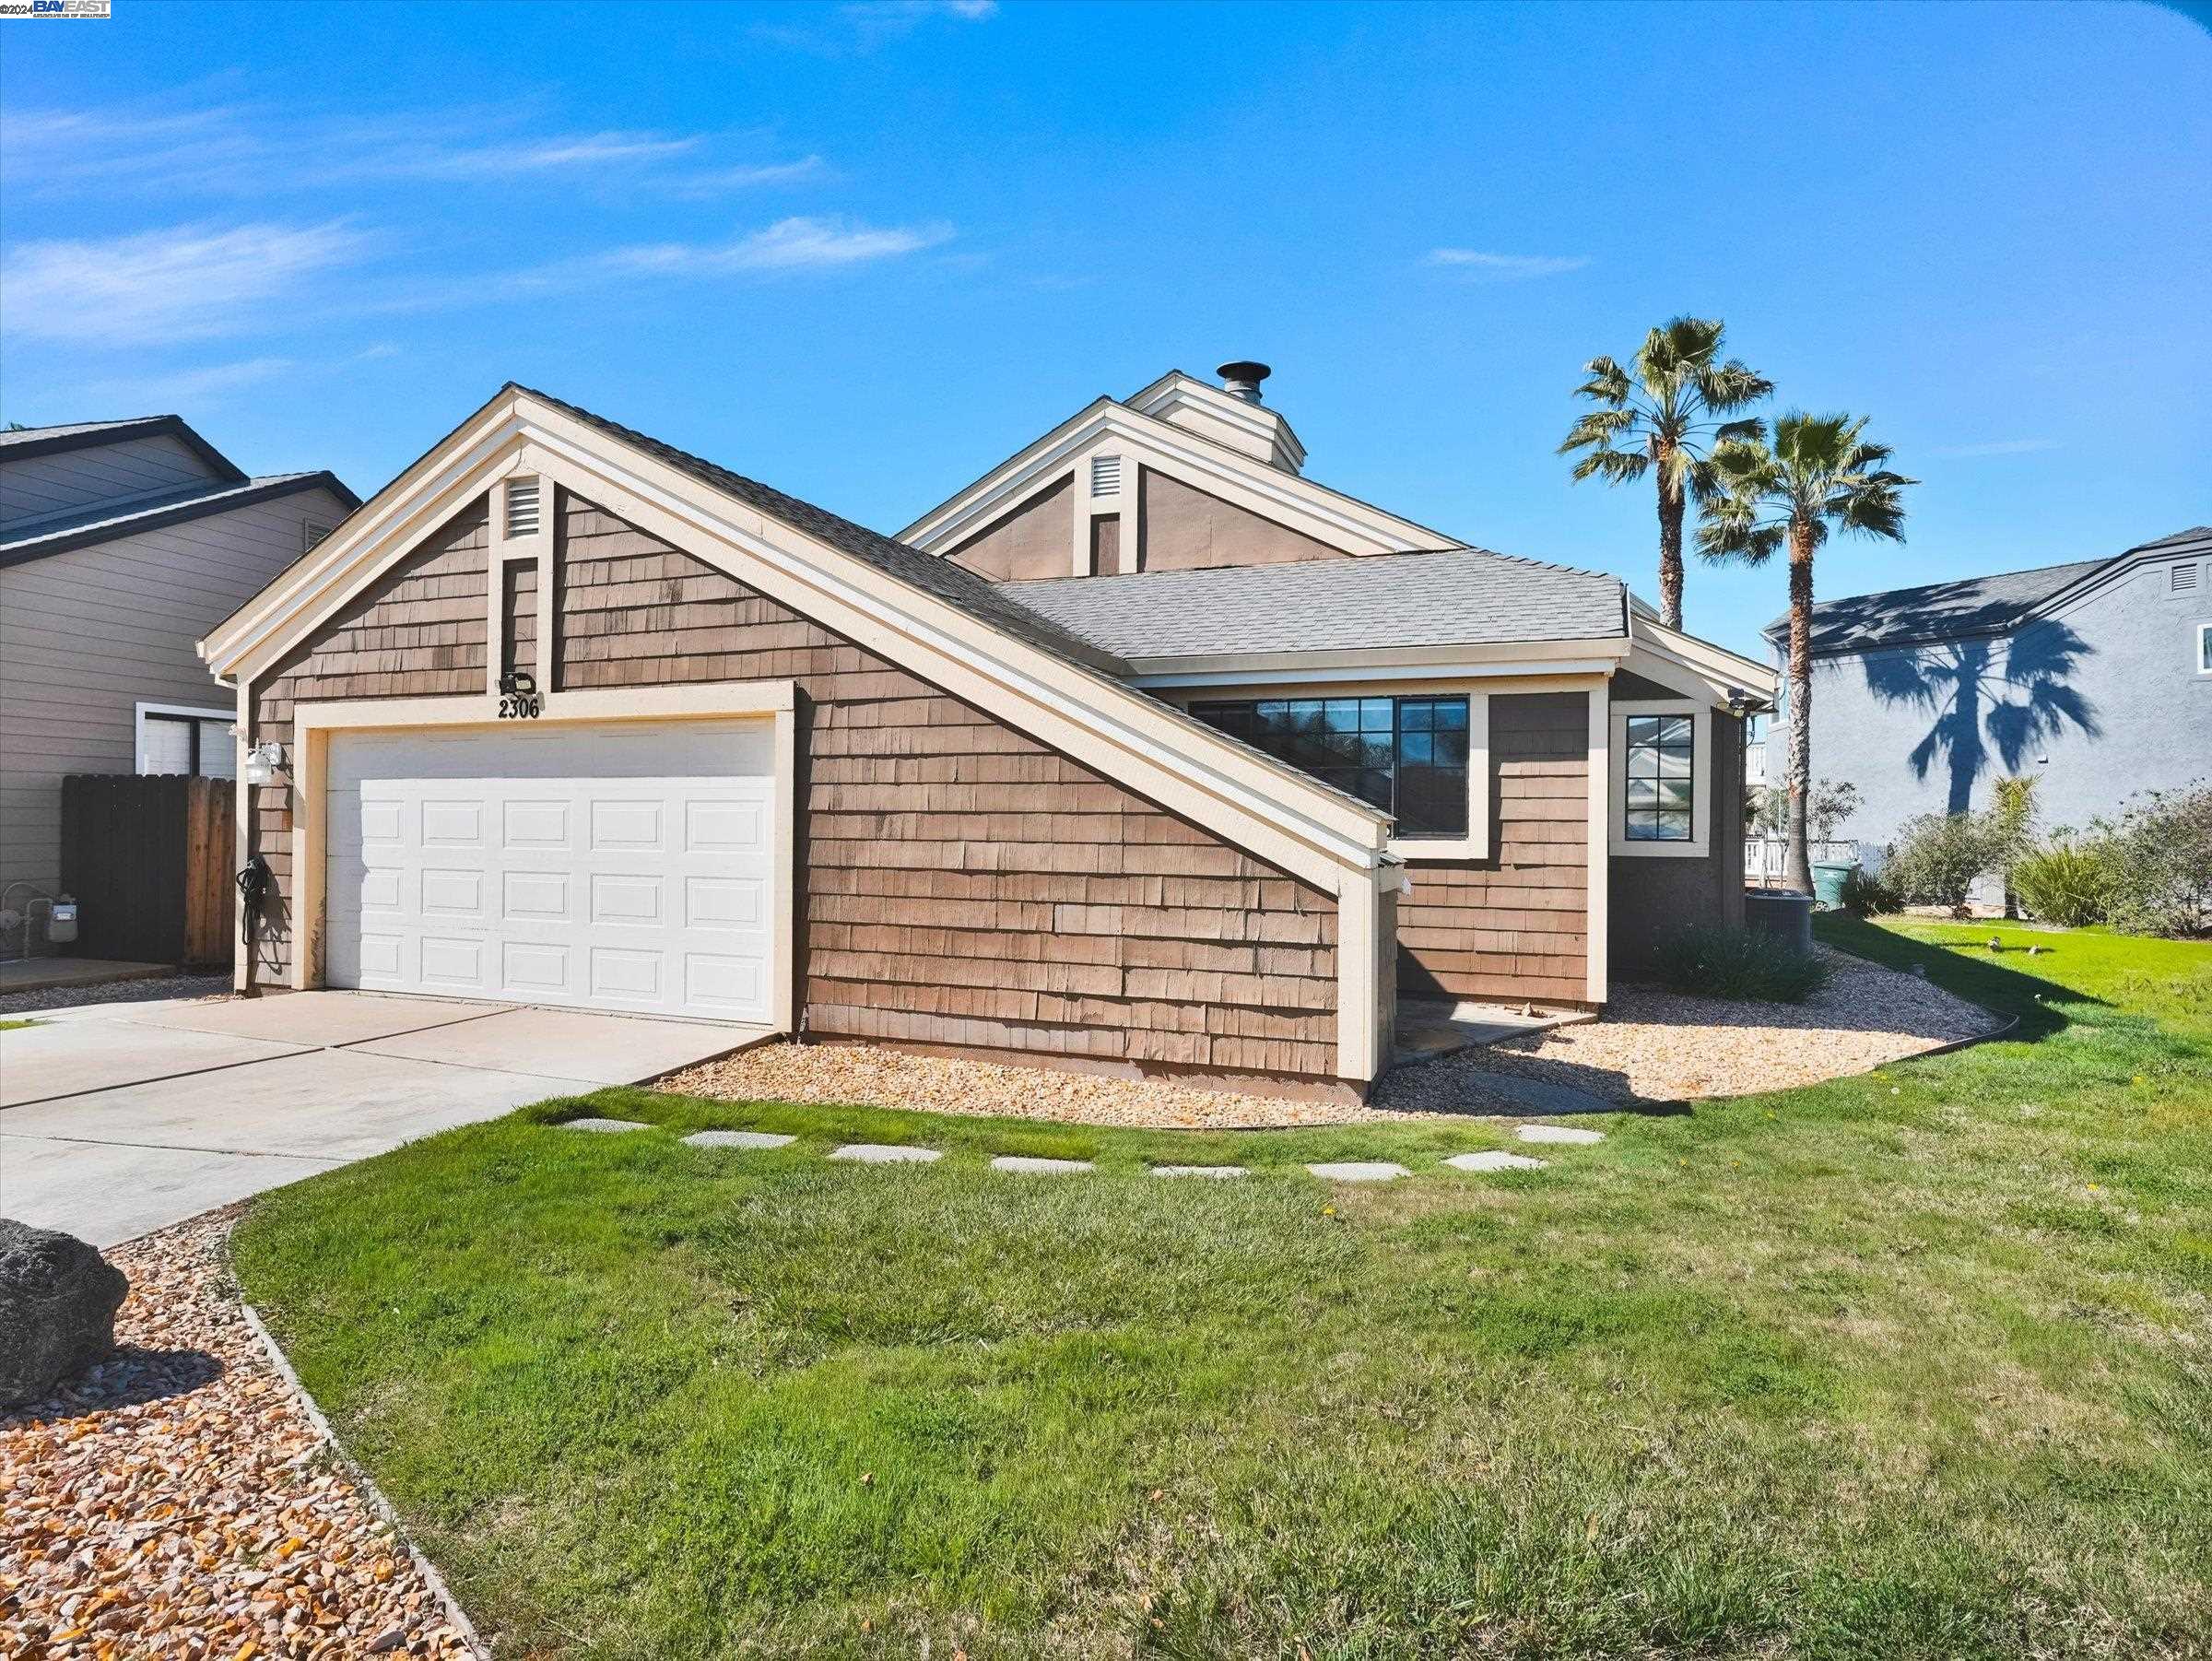 2306 Cove Court, Discovery Bay, CA 94505